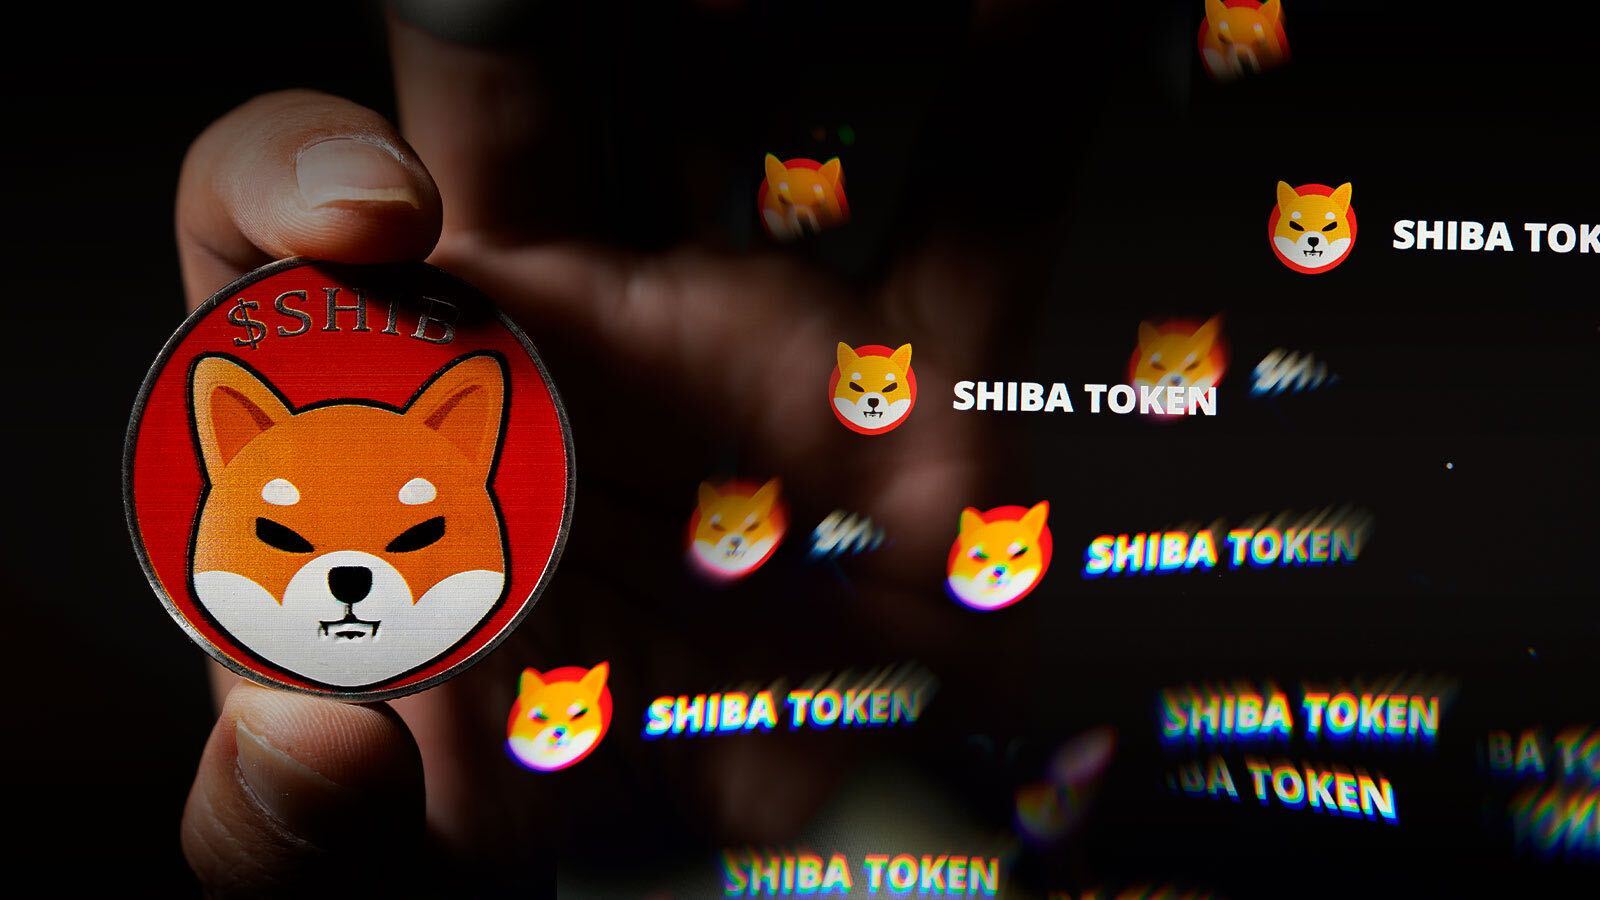 Shiba Inu Social Mentions Reach The Highest Point In 3 Months